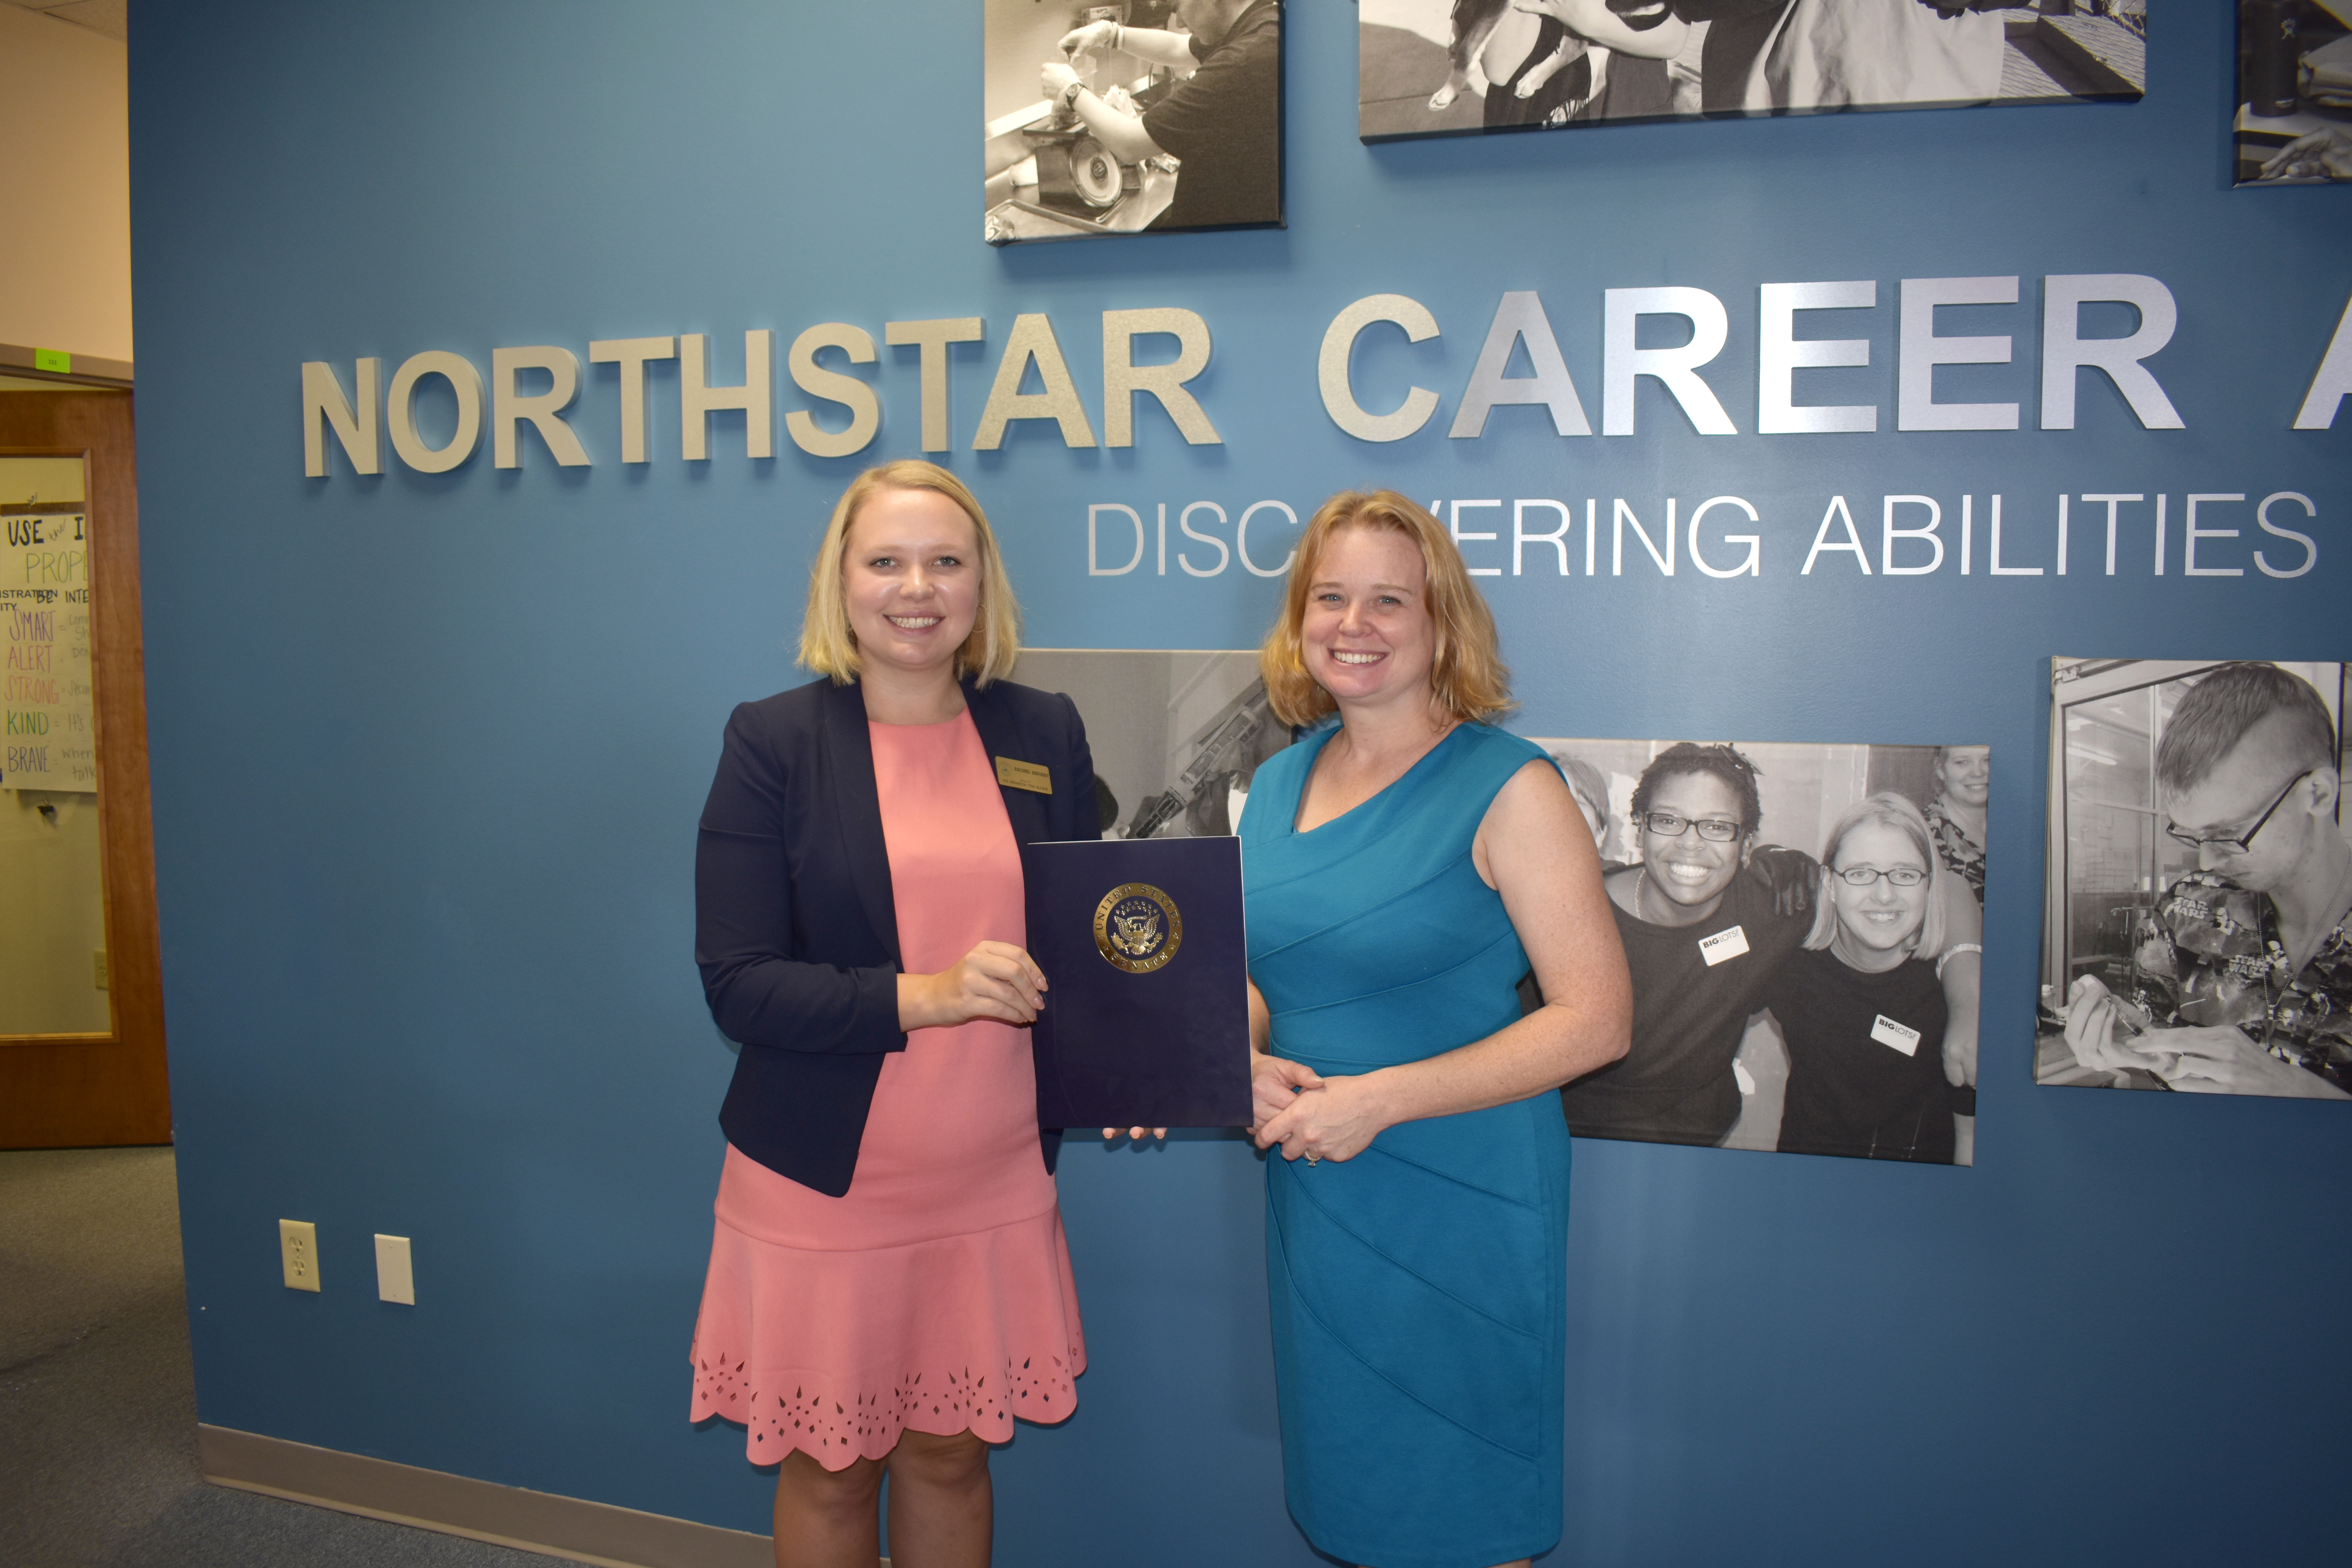 Northstar Career Academy celebrated abilities at work to kick off National Disabilities Employment Awareness Month